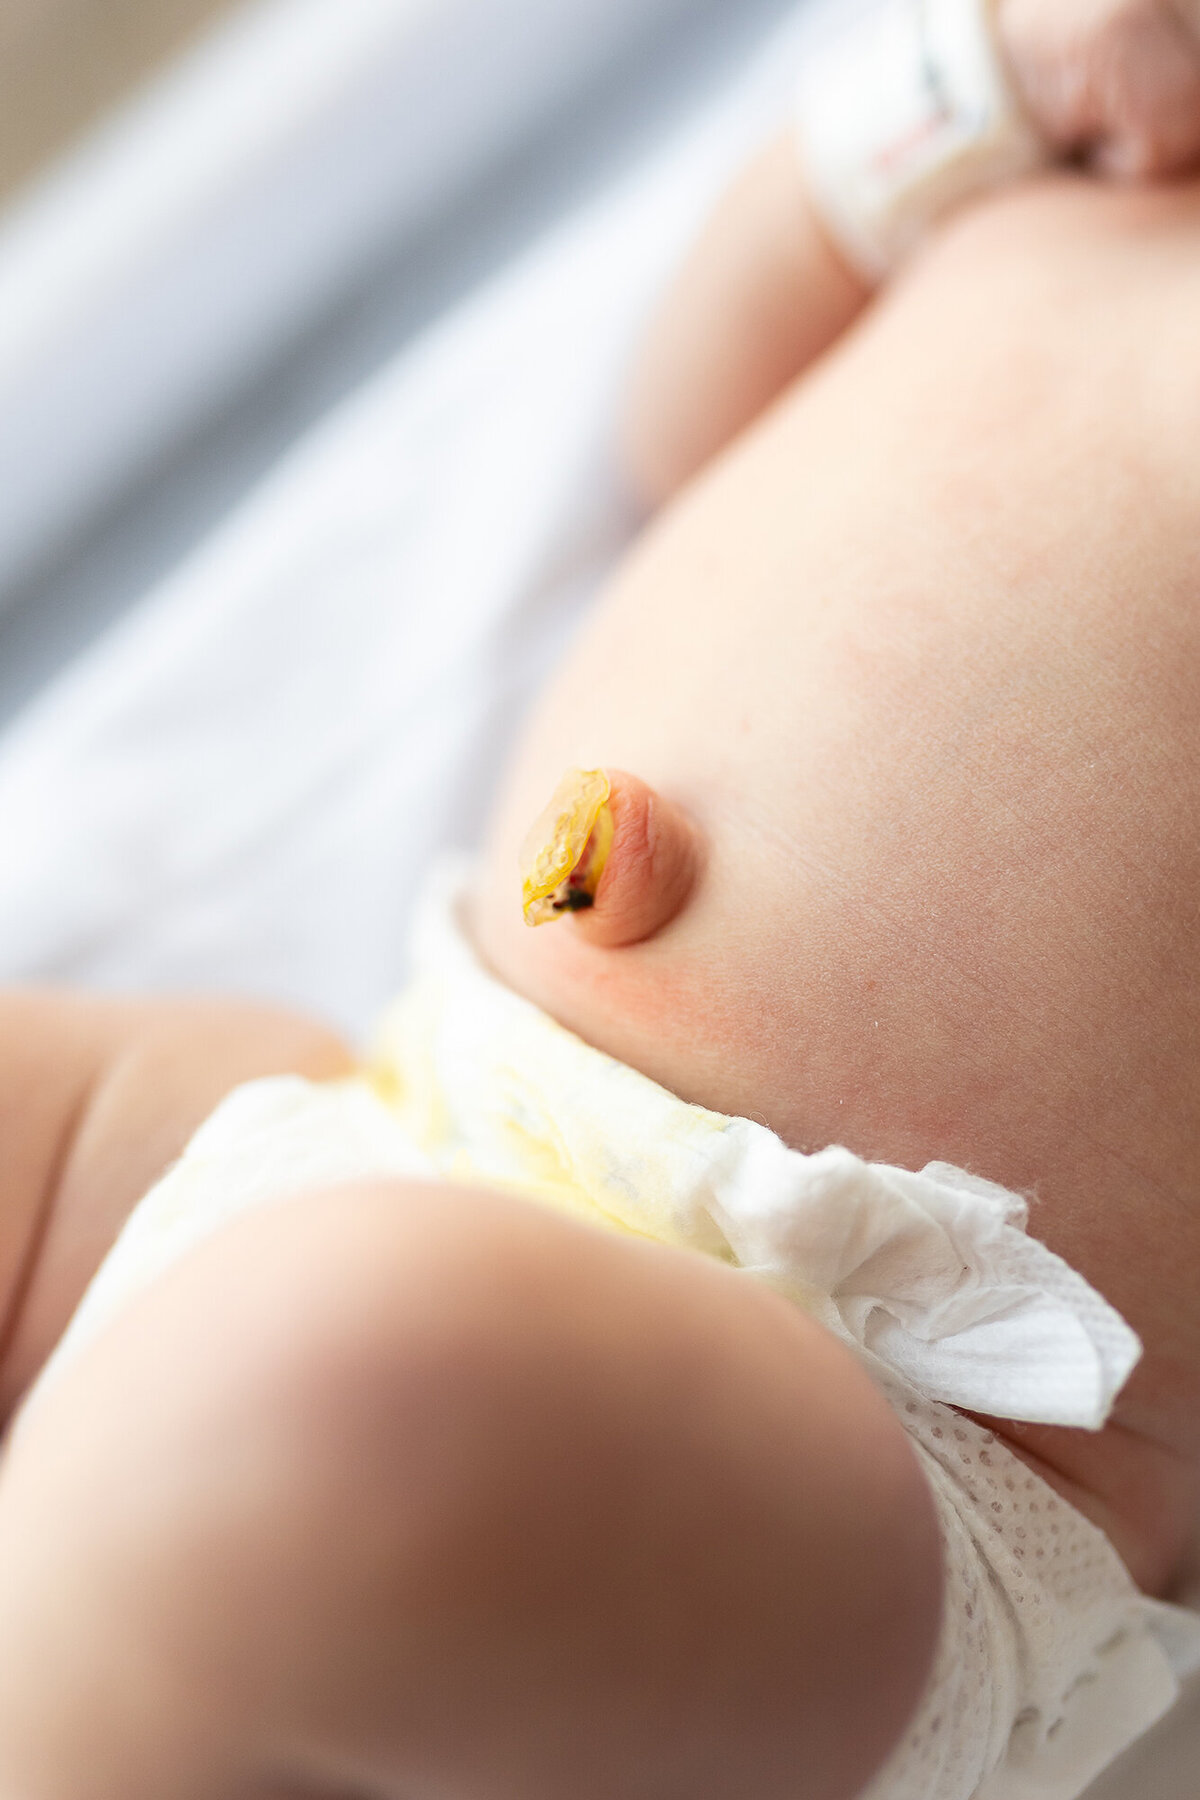 Newborn belly button in the hospital.